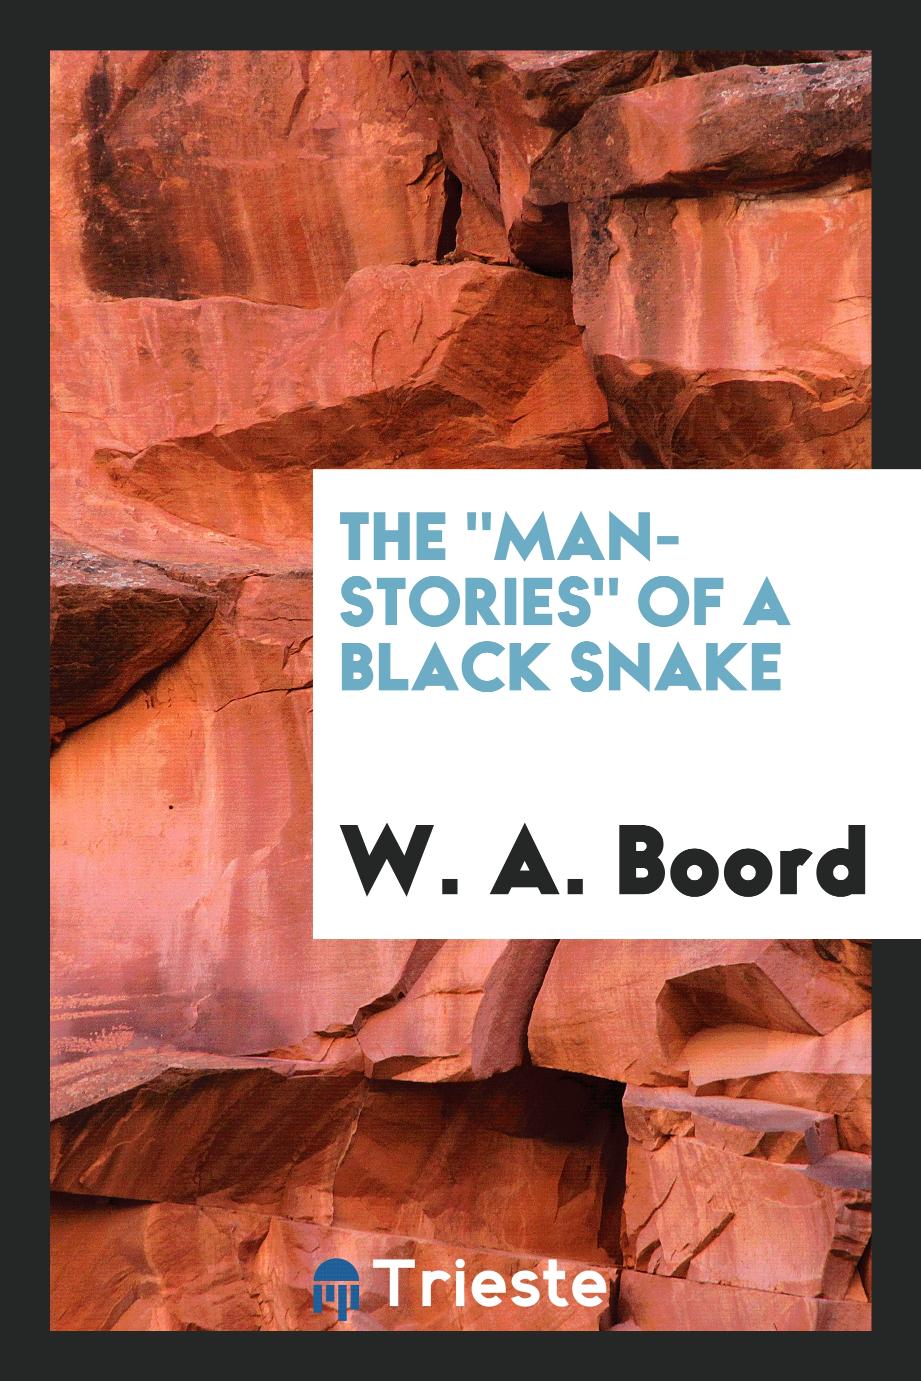 The "Man-Stories" of a Black Snake